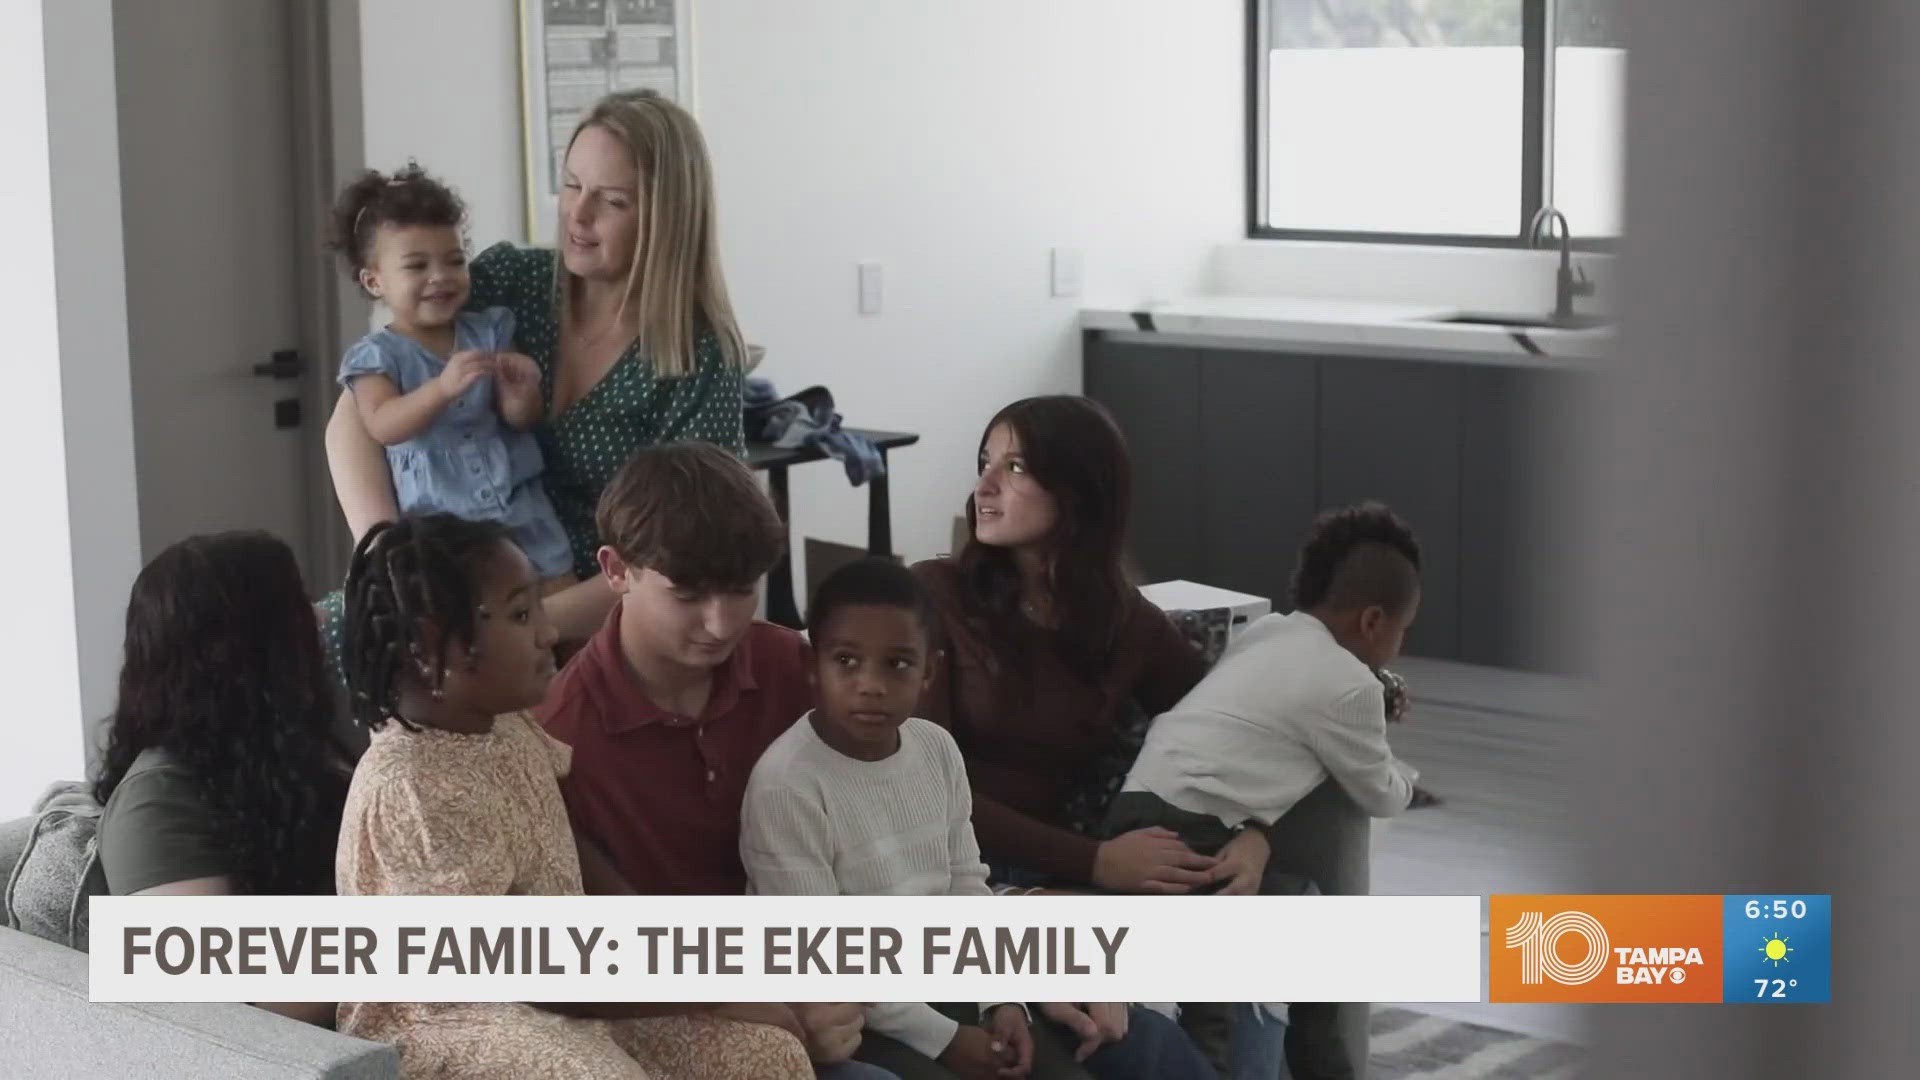 The Eker family is happy to take in kids who are in need of a loving home as they await adoption, no matter how long their stay is.